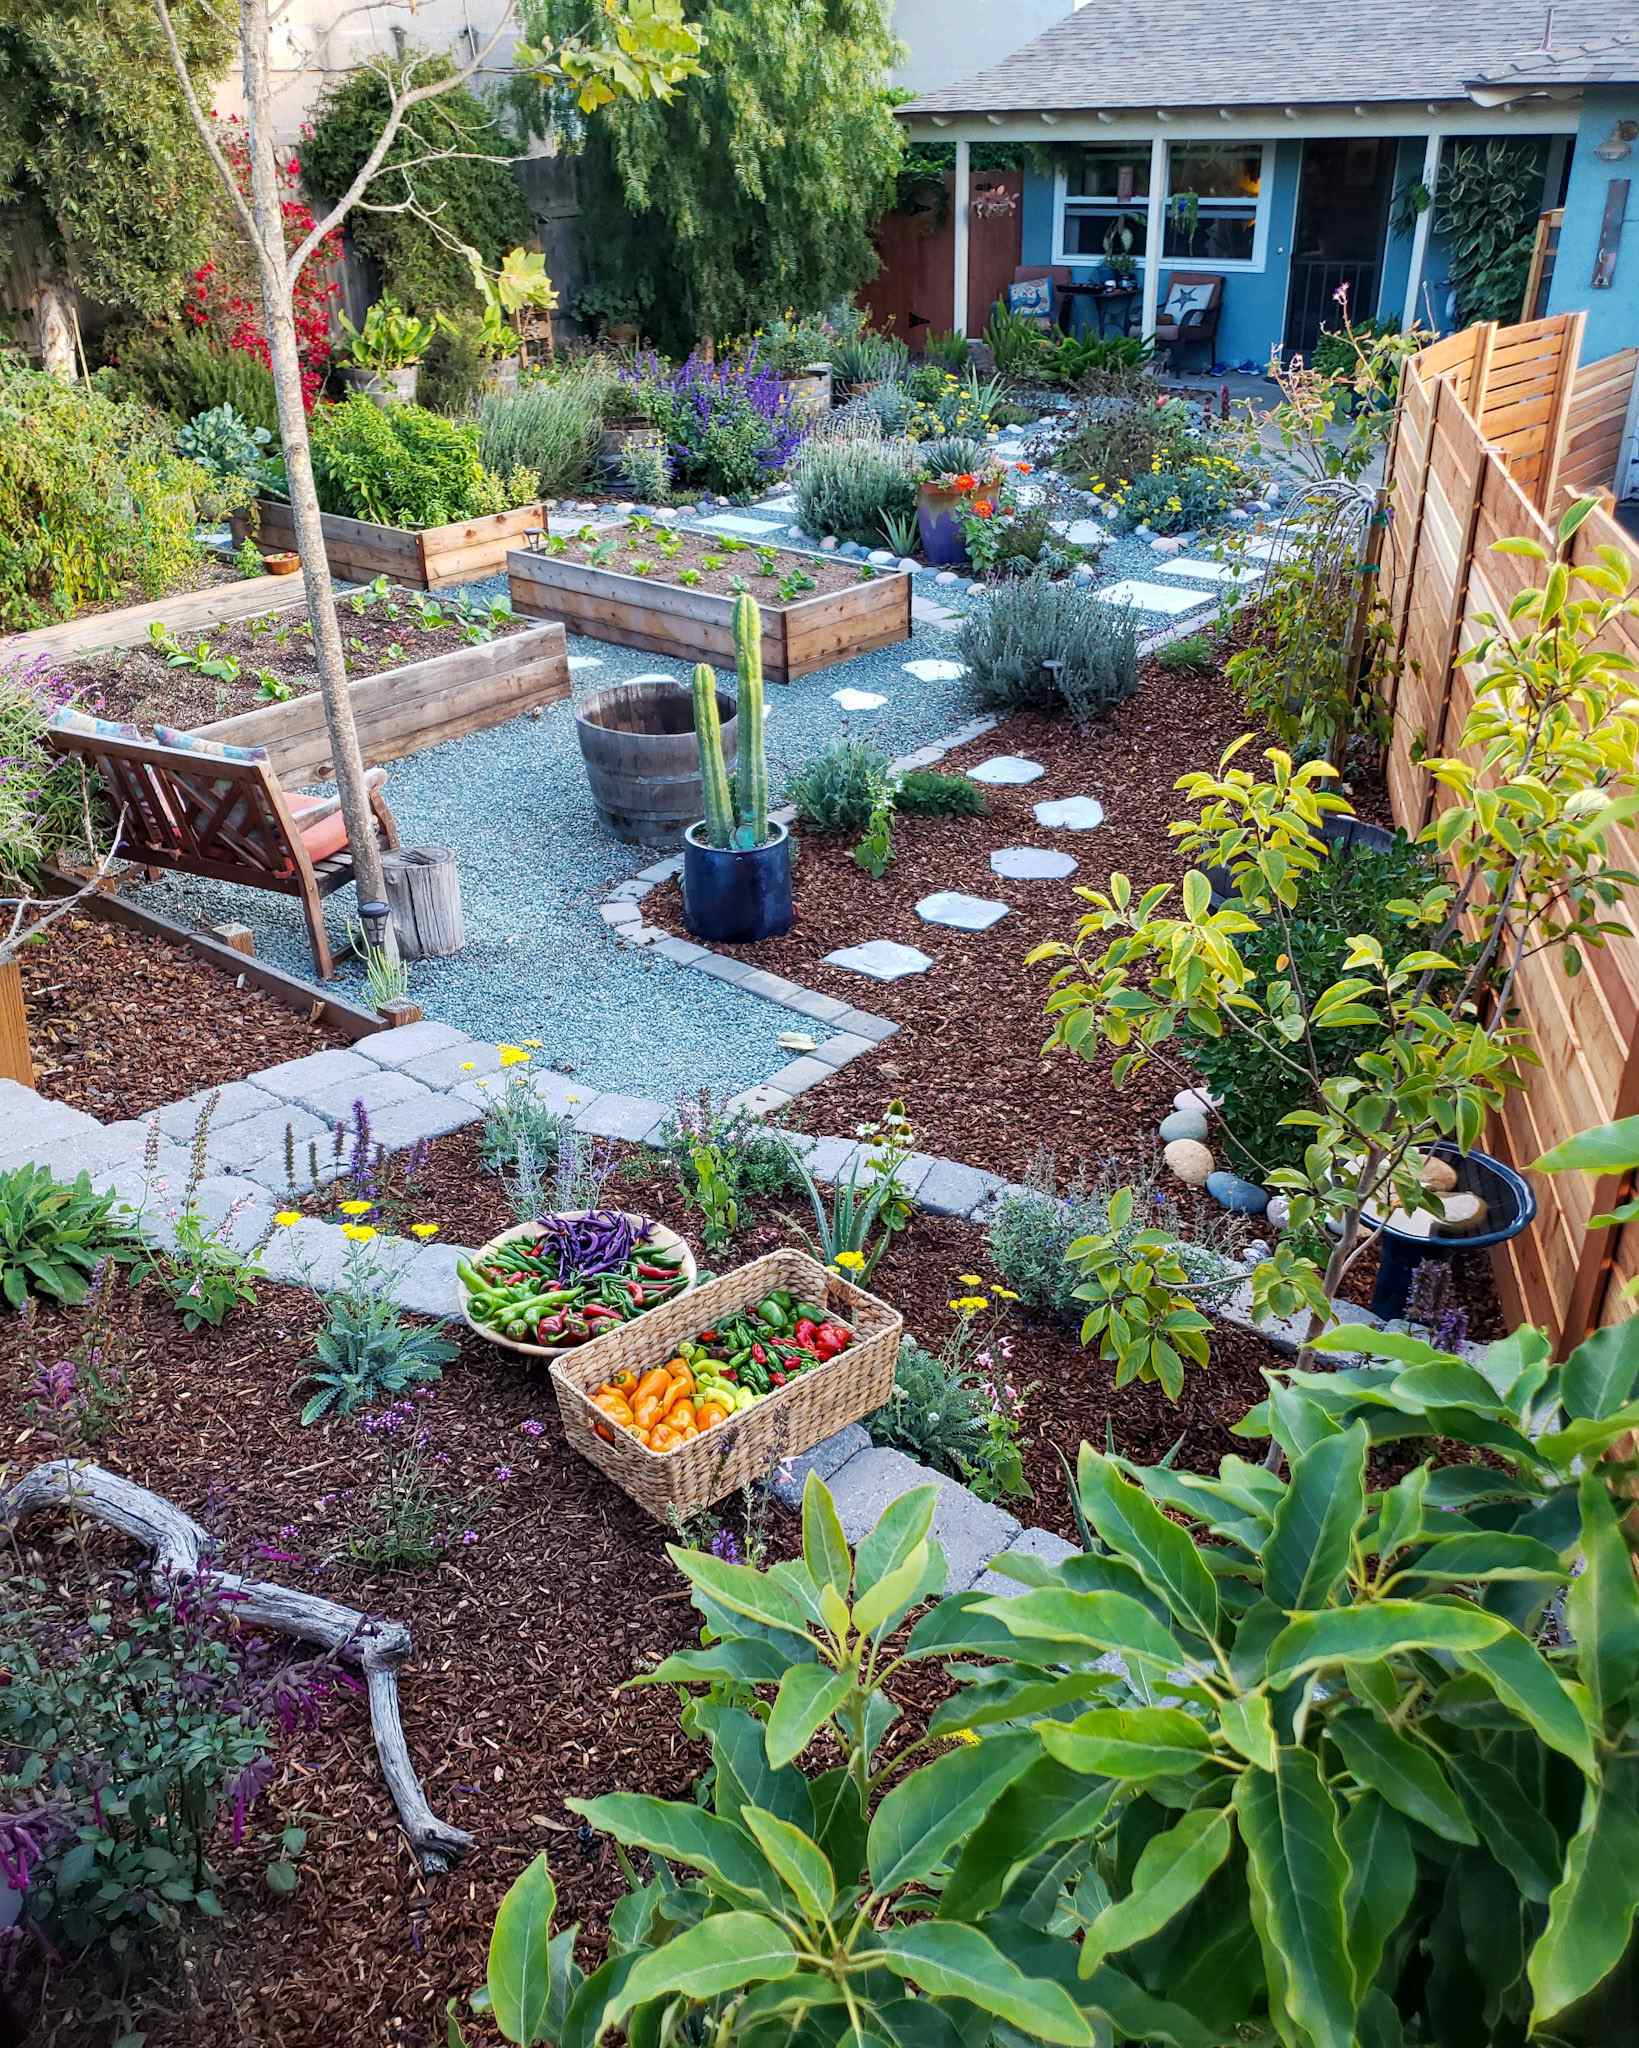 The front yard garden shown, the image is taken towards the house. From terraced garden space in the foreground mulched with redwood bark adorned with two wicker baskets full of various chili peppers, to the redwood bark mulched perimeter dotted with trees and shrubs, to the gravel pathways lined with pavers for a walkway, along with various garden beds mulched with woody compost. There are plants of all kinds growing amongst each other, in every space possible. 